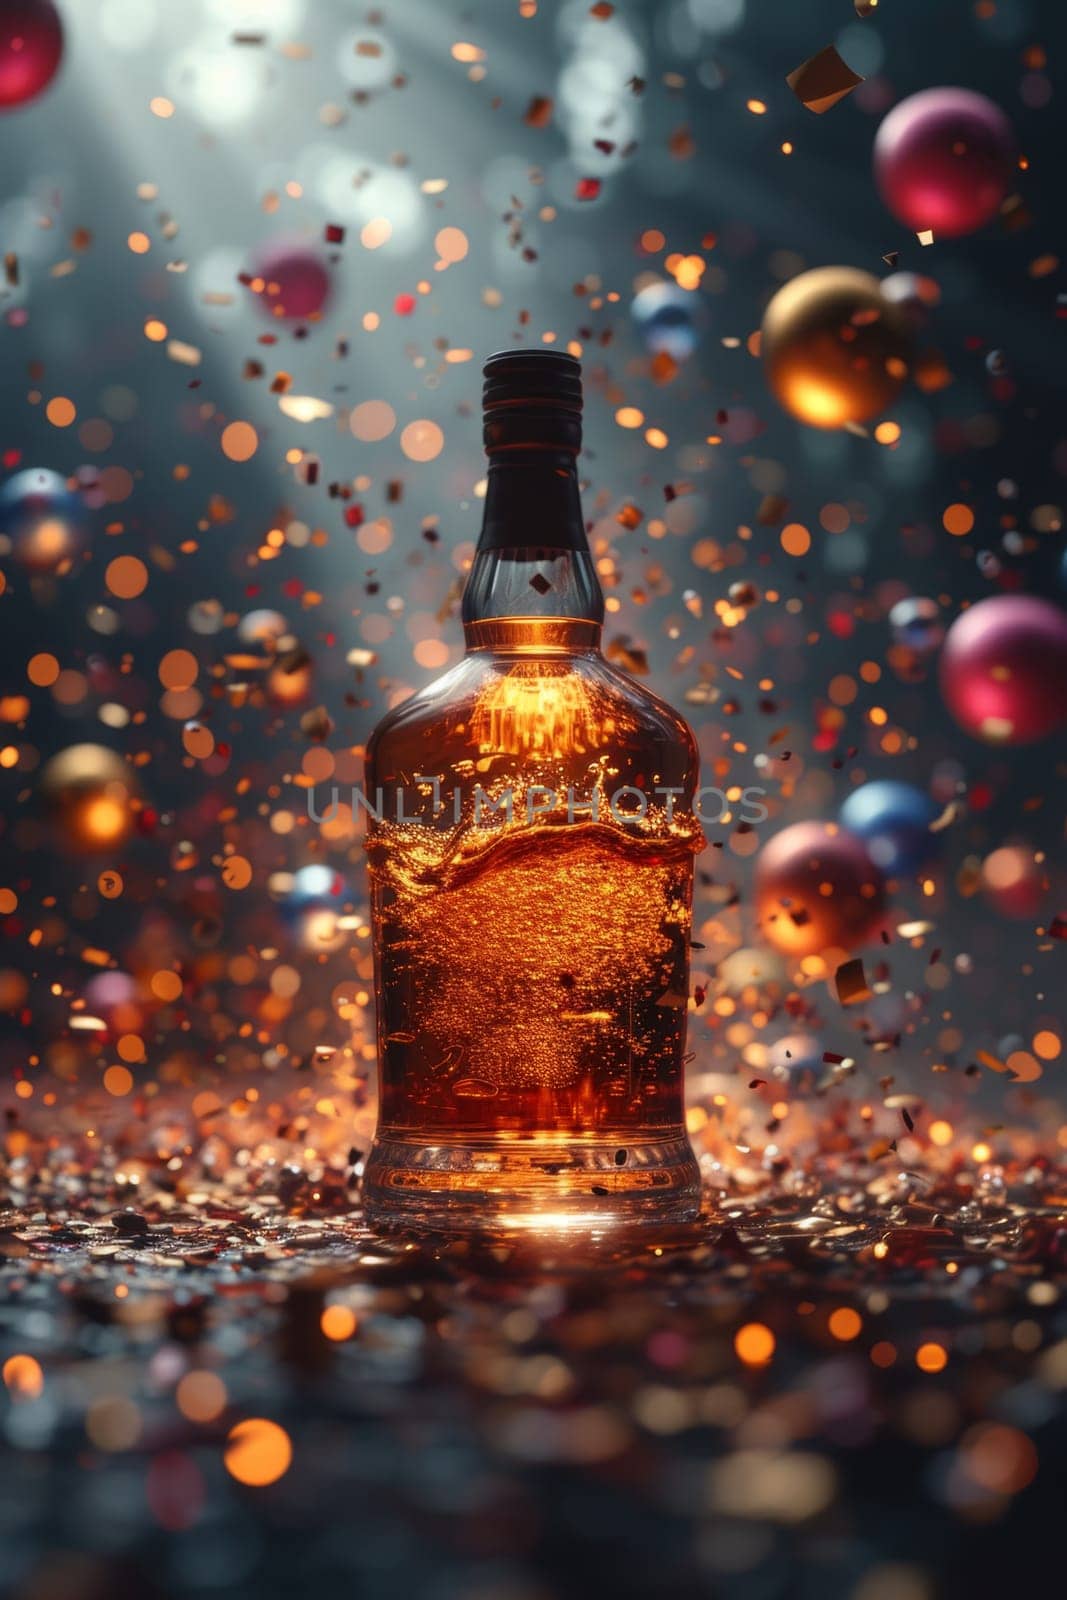 A bottle of whiskey with an empty label on a festive background with balloons and confetti by Lobachad